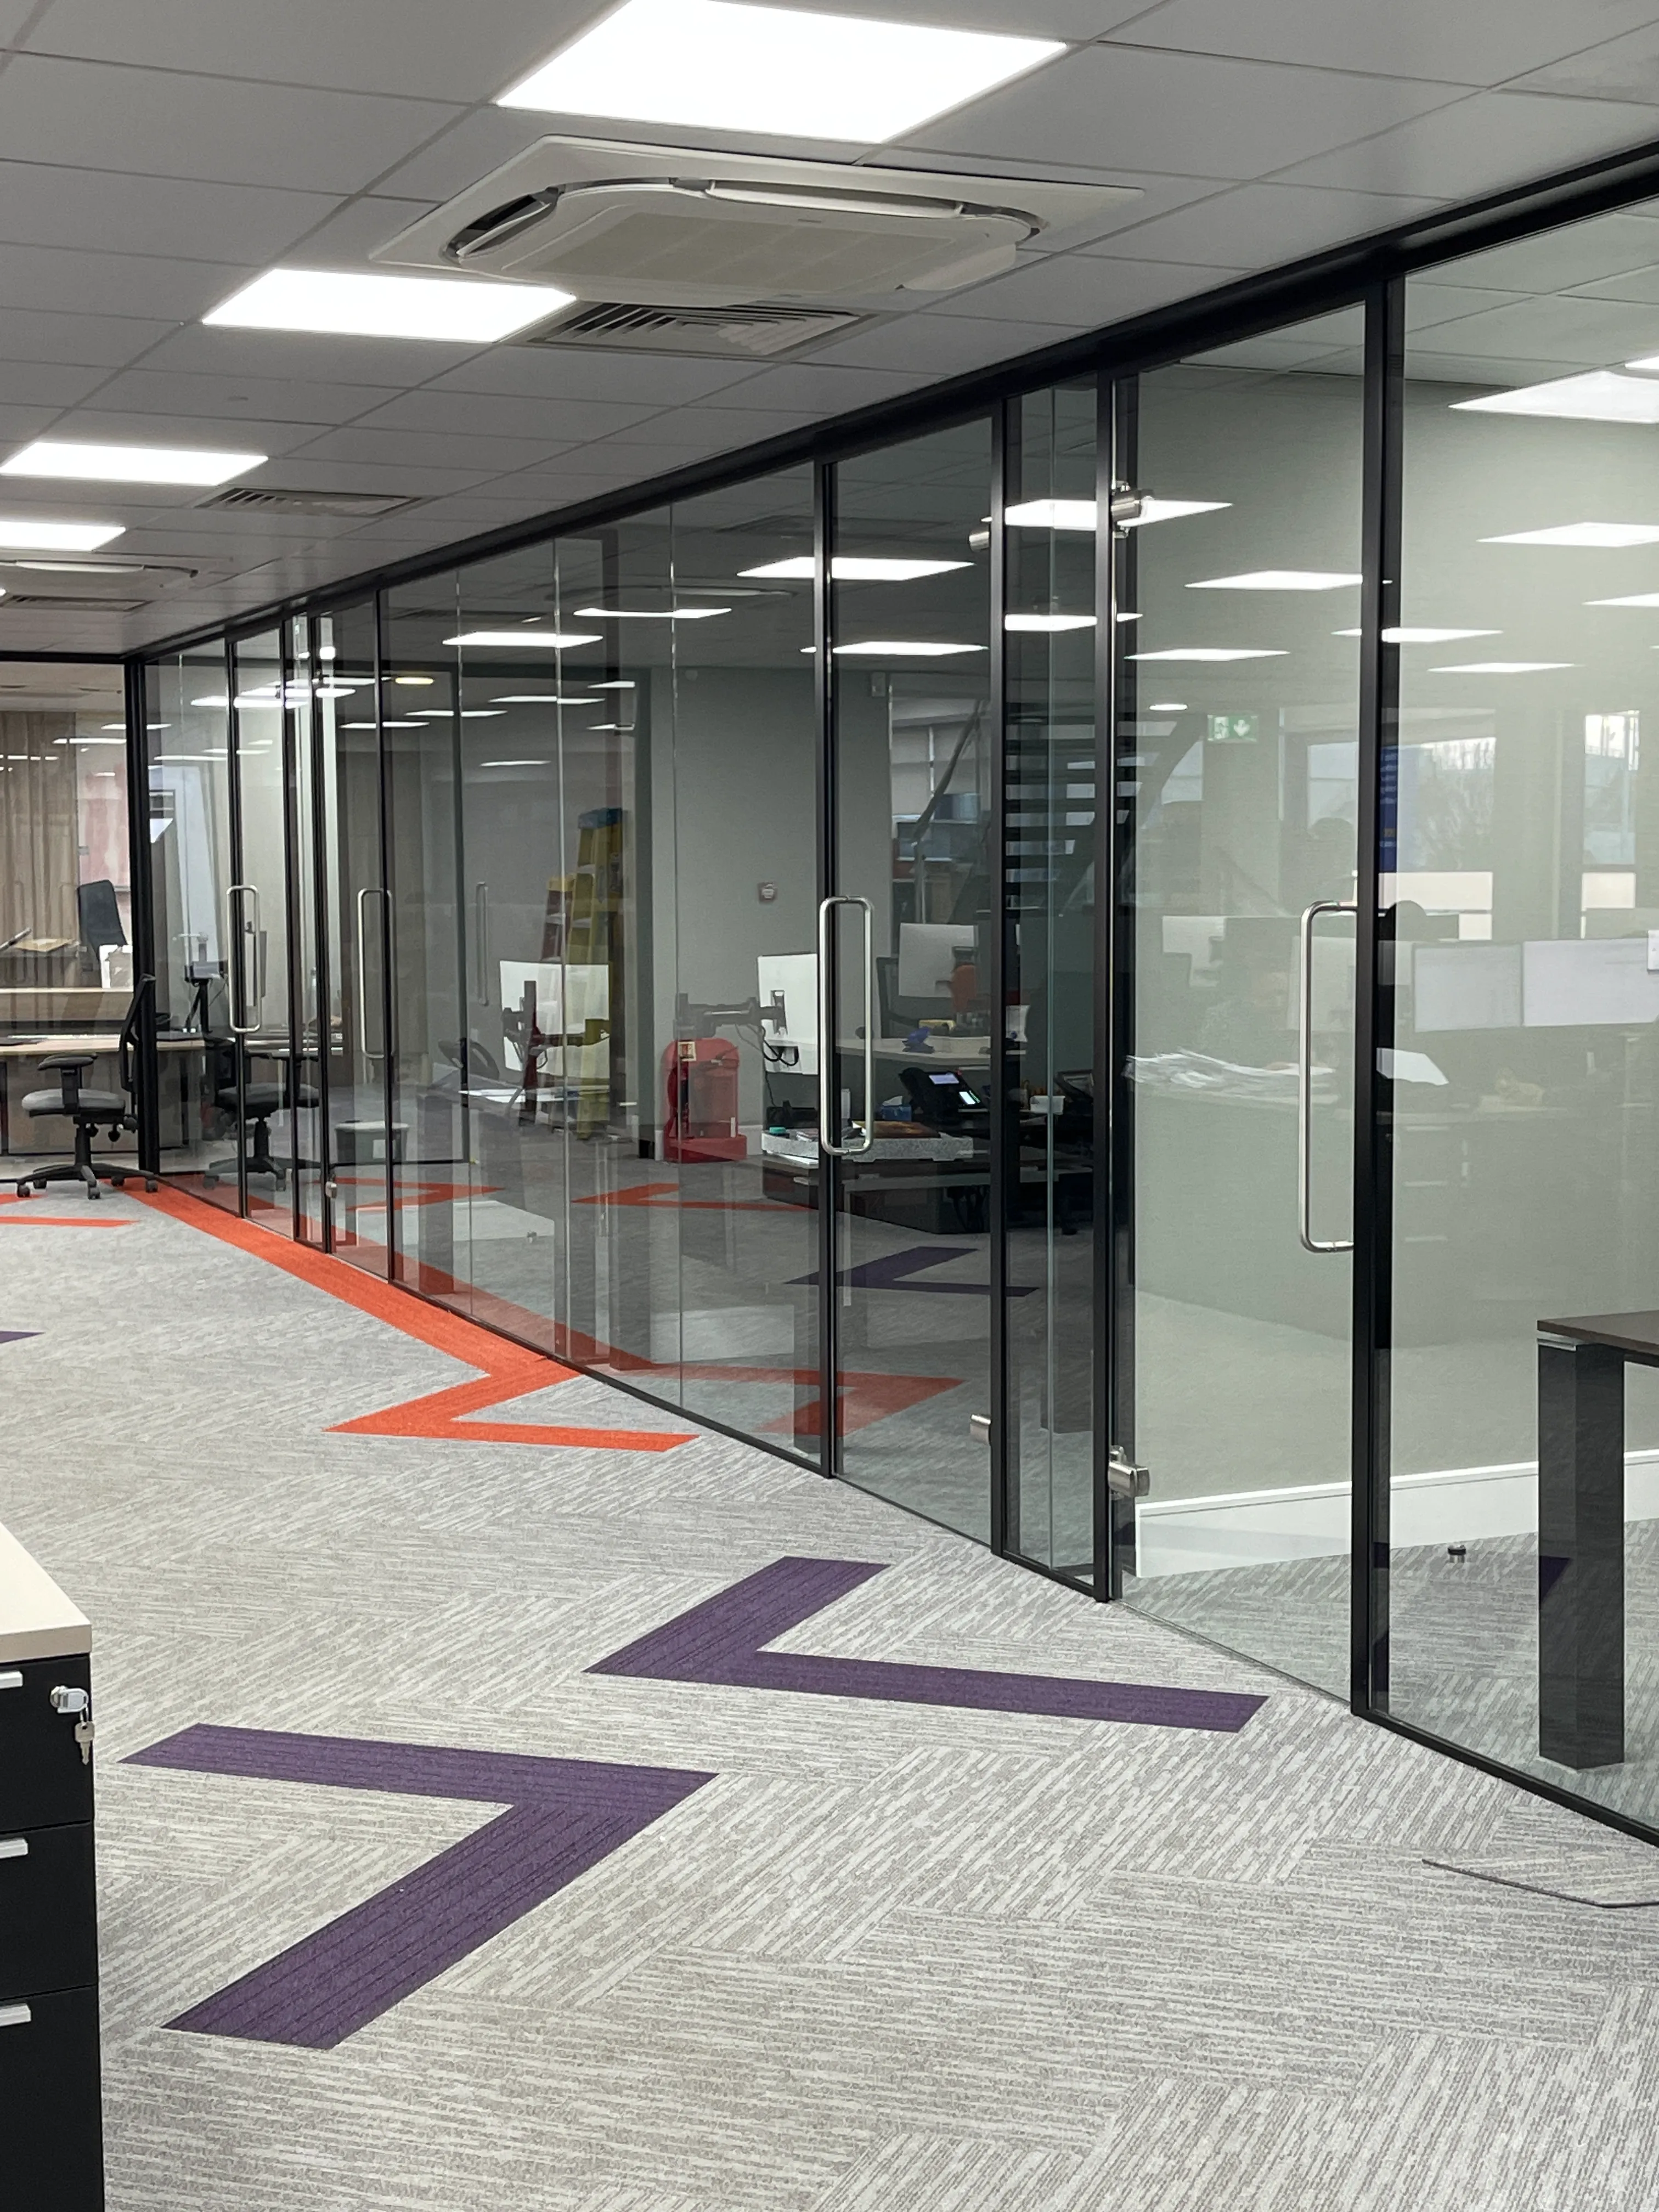 Office space divided with framed glass partitions